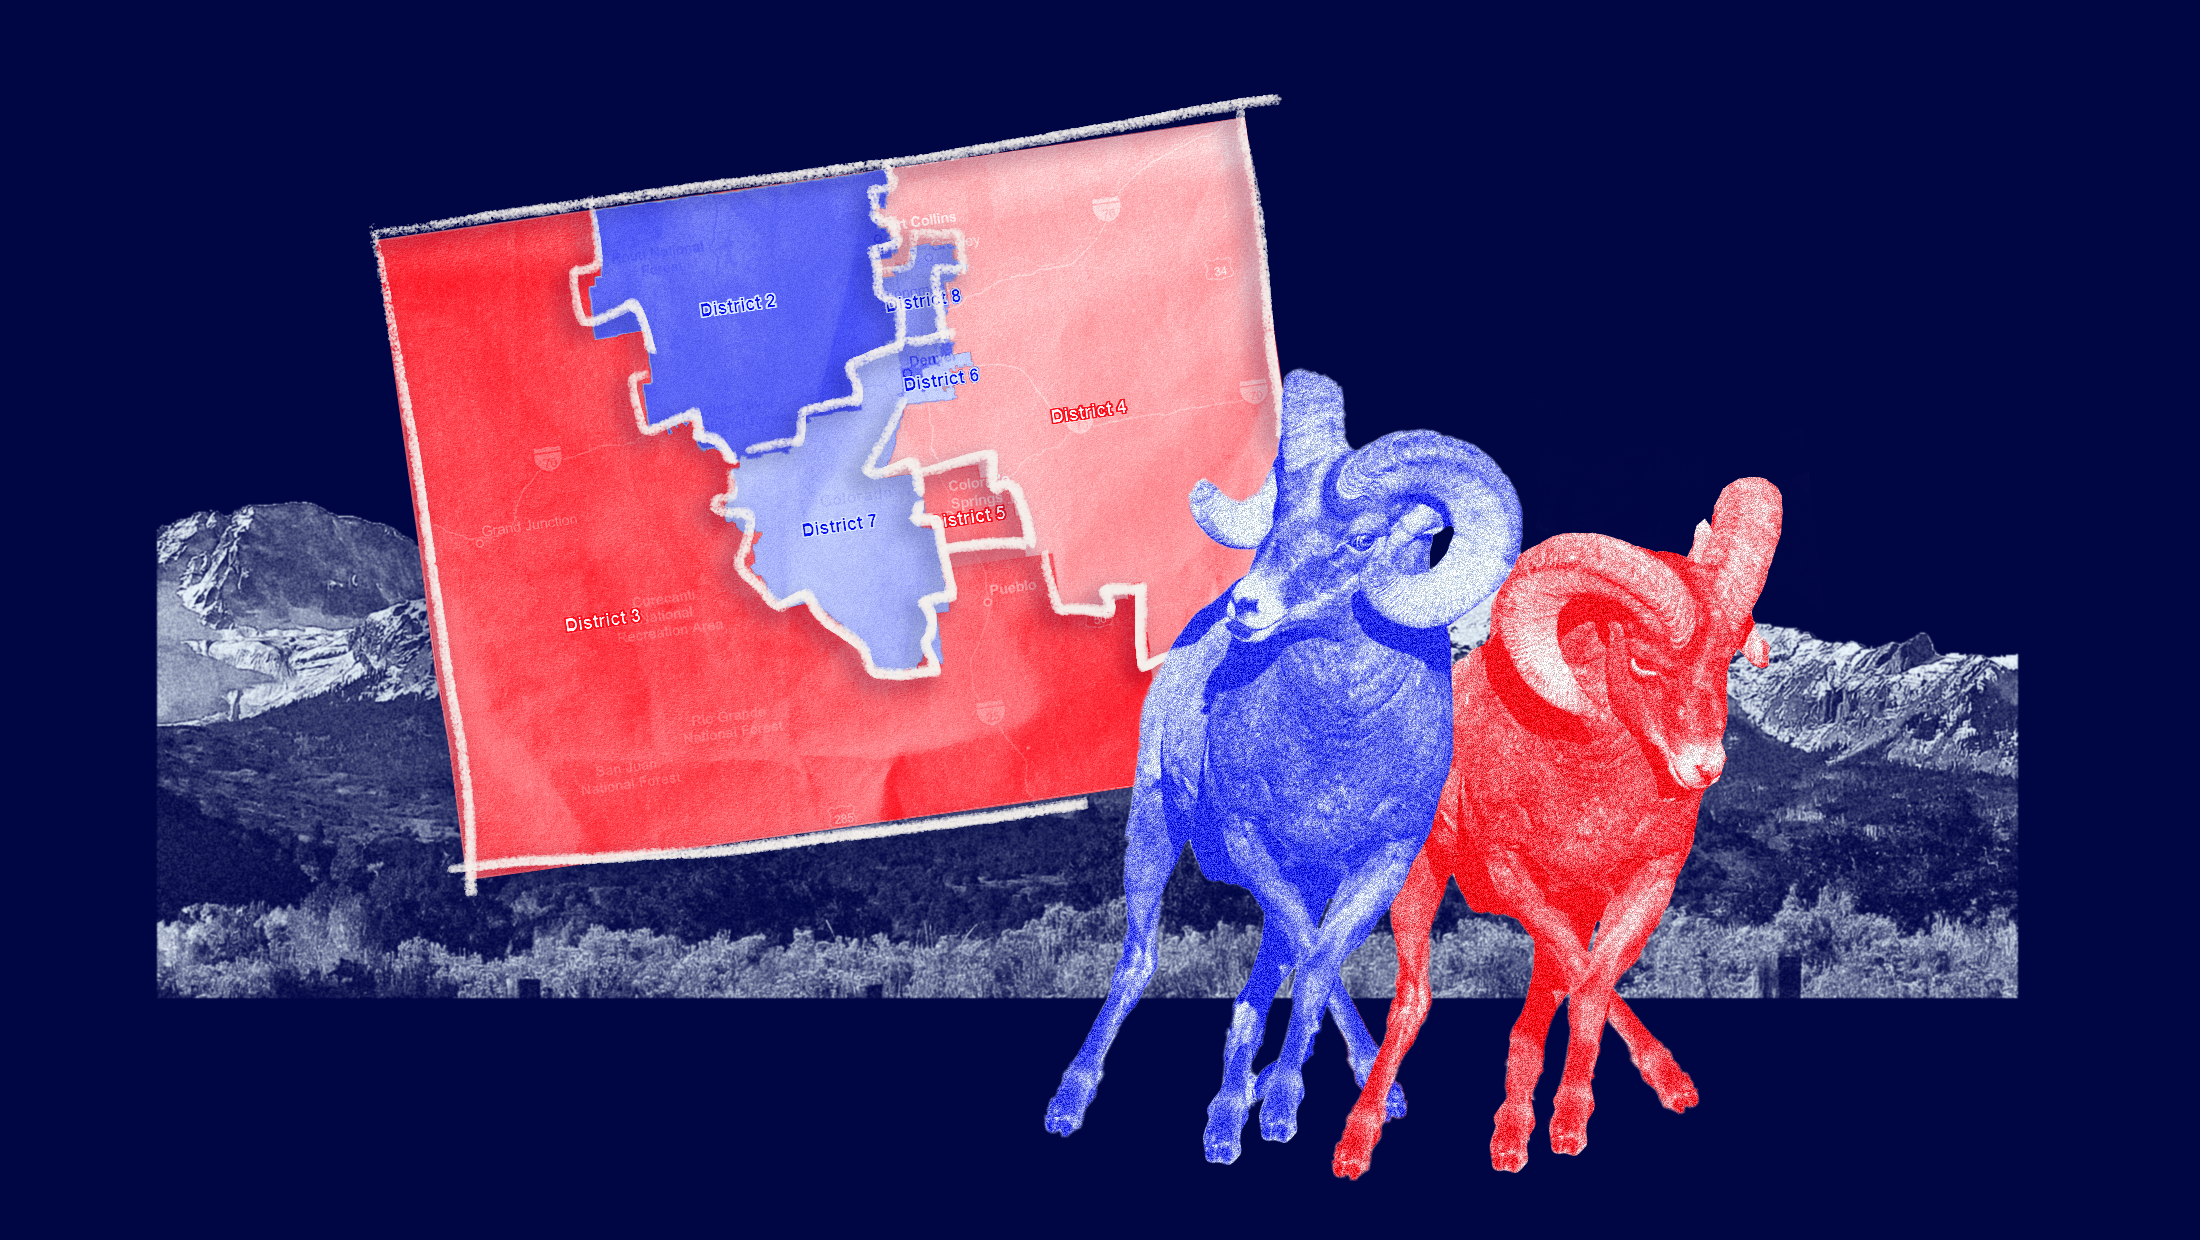 A redistricting map of Colorado next to two dueling Rocky Mountain Bighorn Sheep, one red and one blue, with the Rocky Mountains appearing in the background